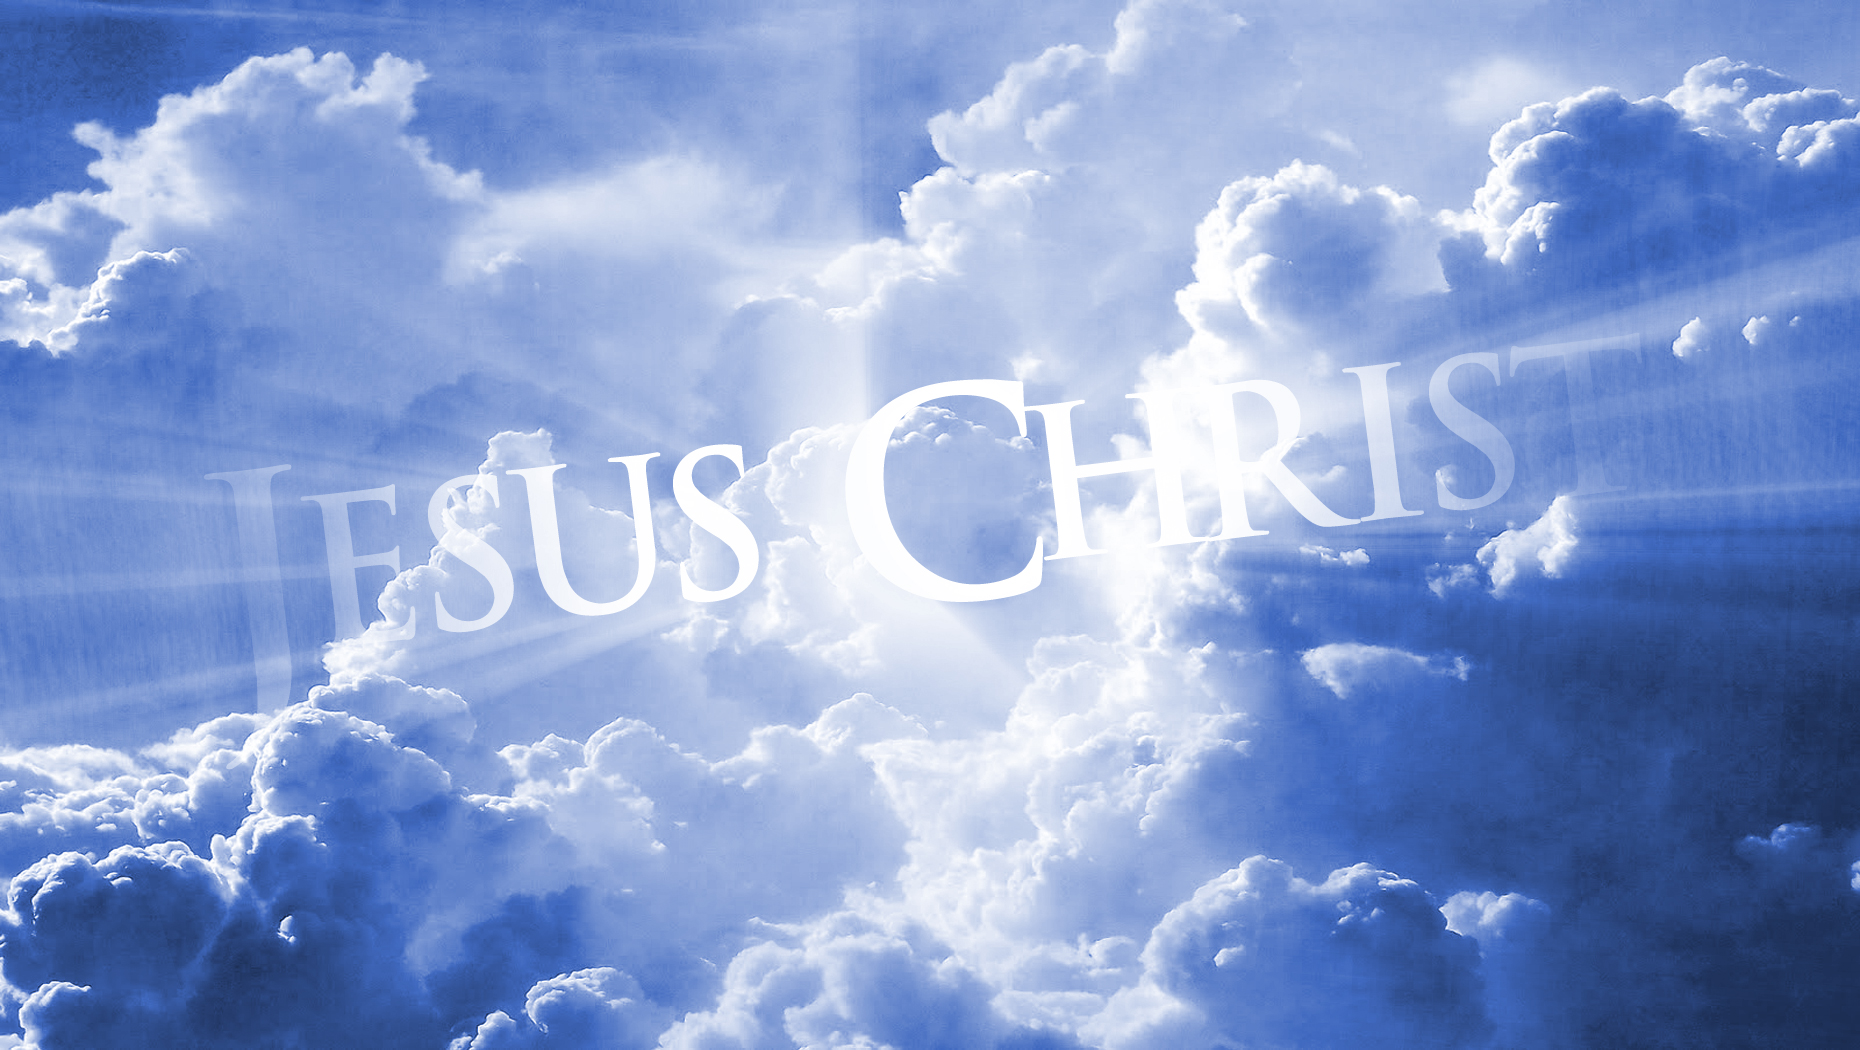 Jesus Christ In Heaven Wallpaper Christian And